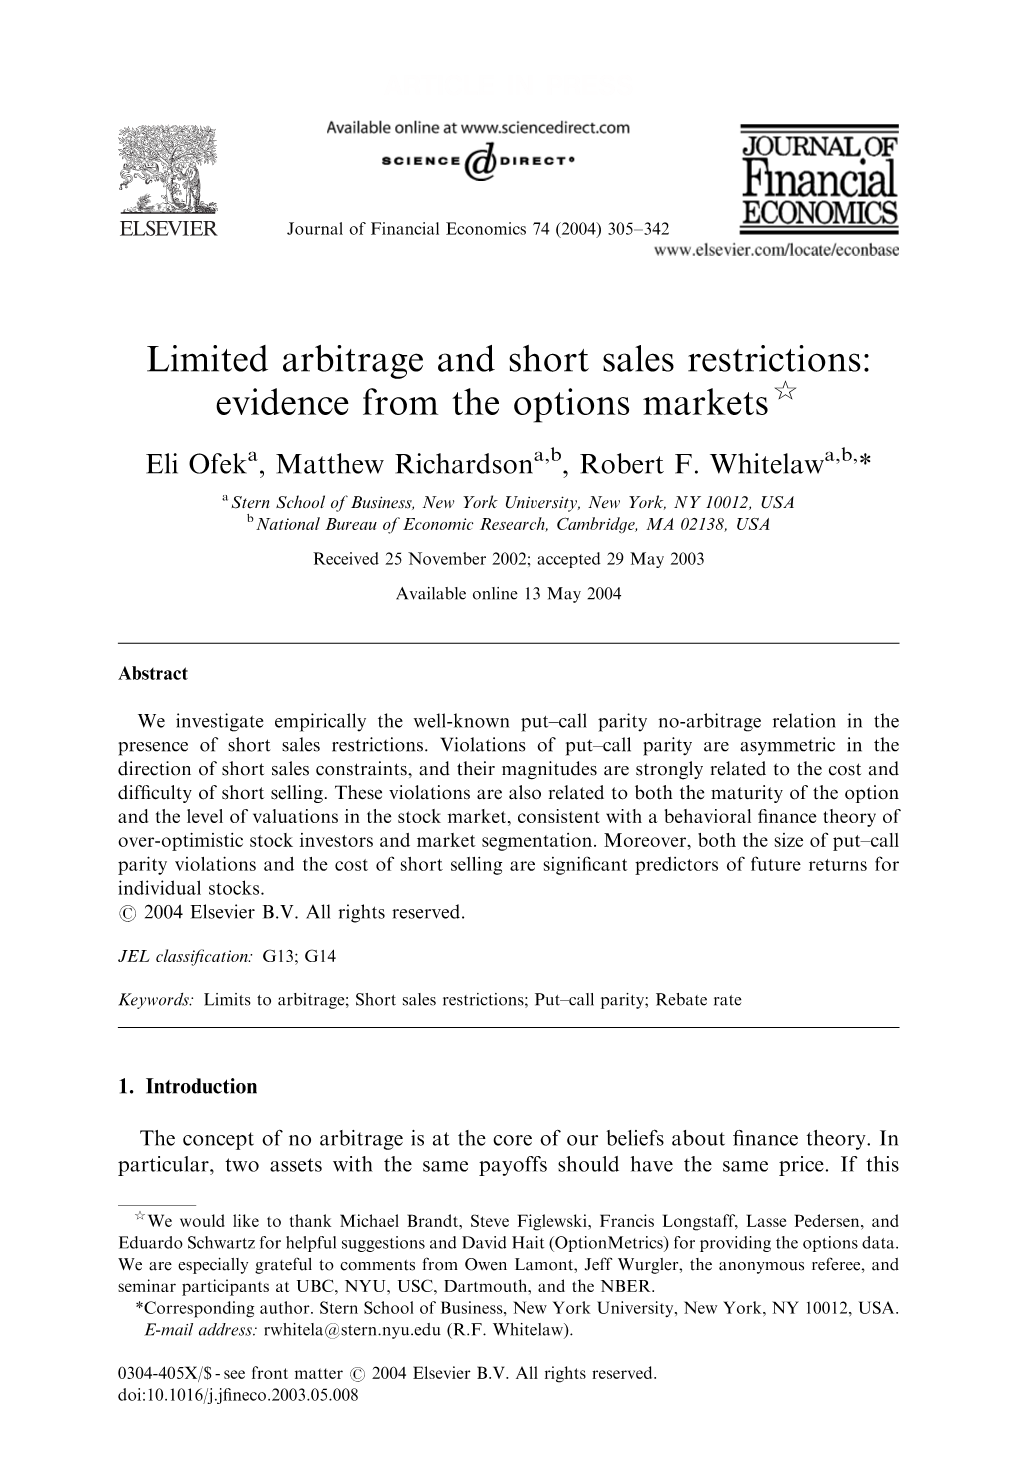 Limited Arbitrage and Short Sales Restrictions: Evidence from the Options Markets$